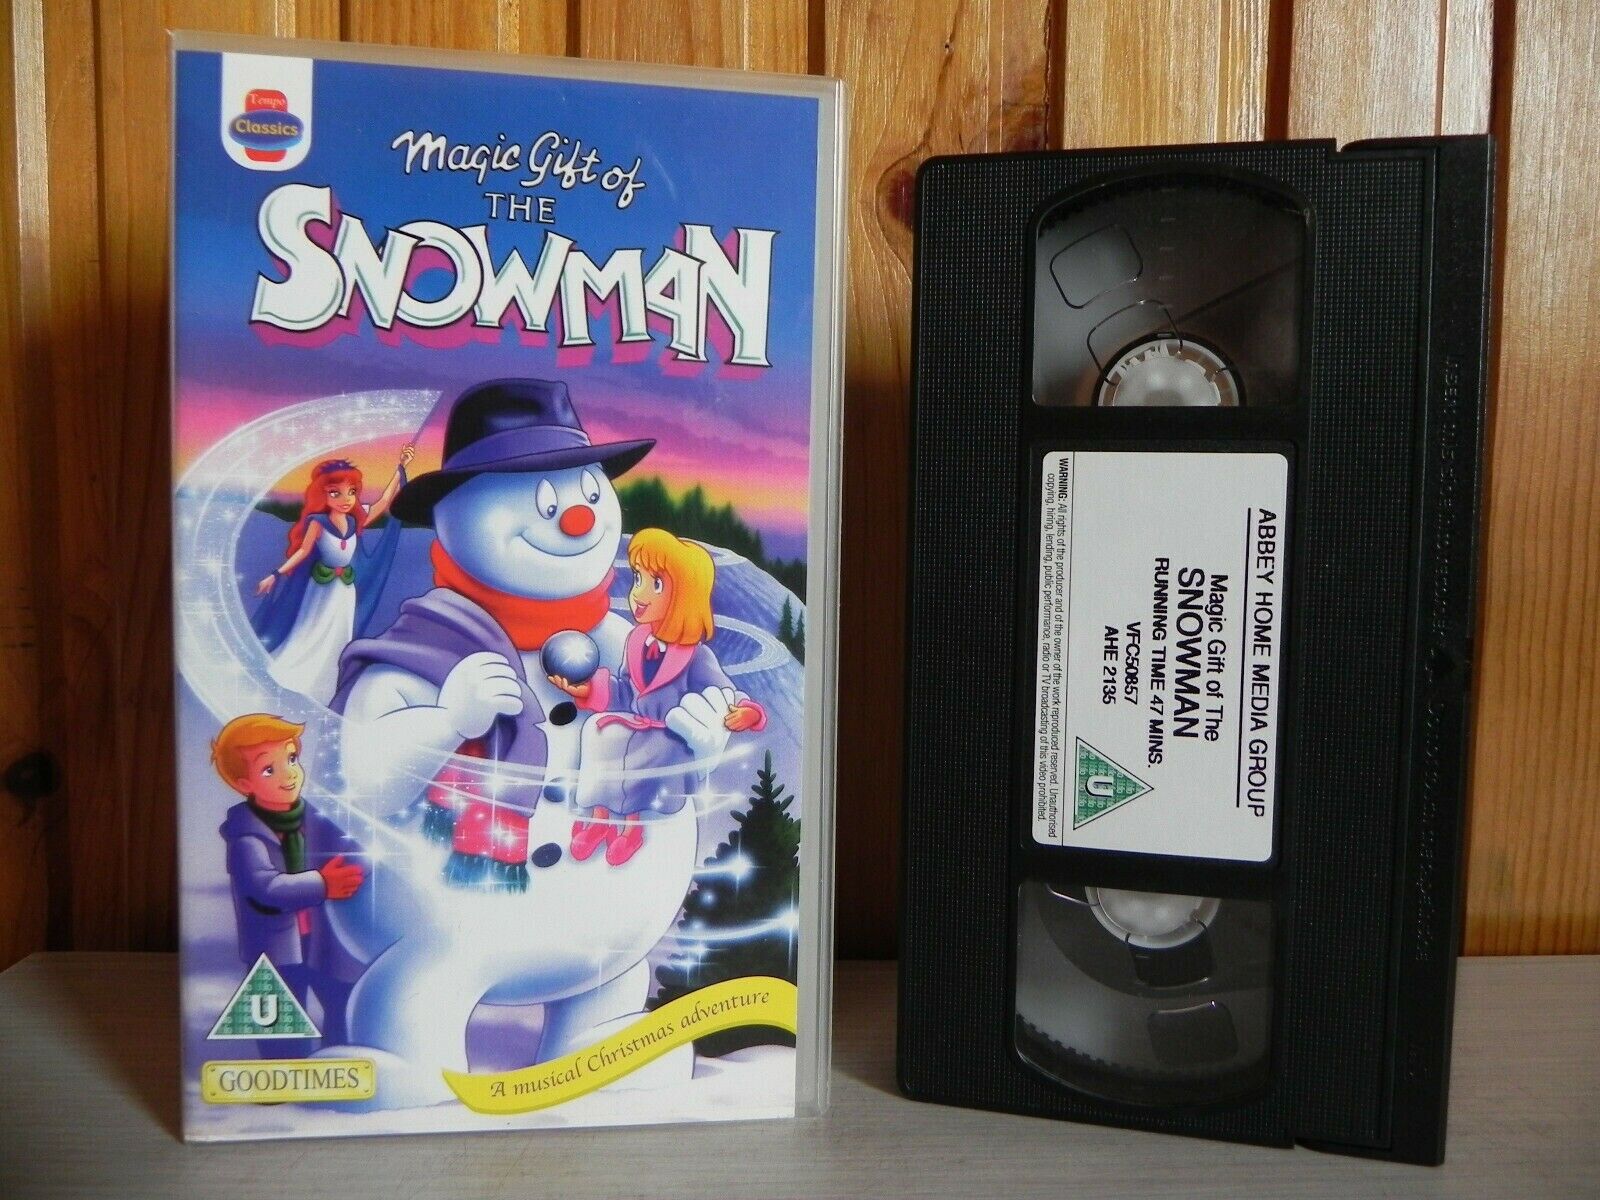 Magic Gift Of The Snowman - Tempo Classics - A Musical Christmas Adventure - VHS-